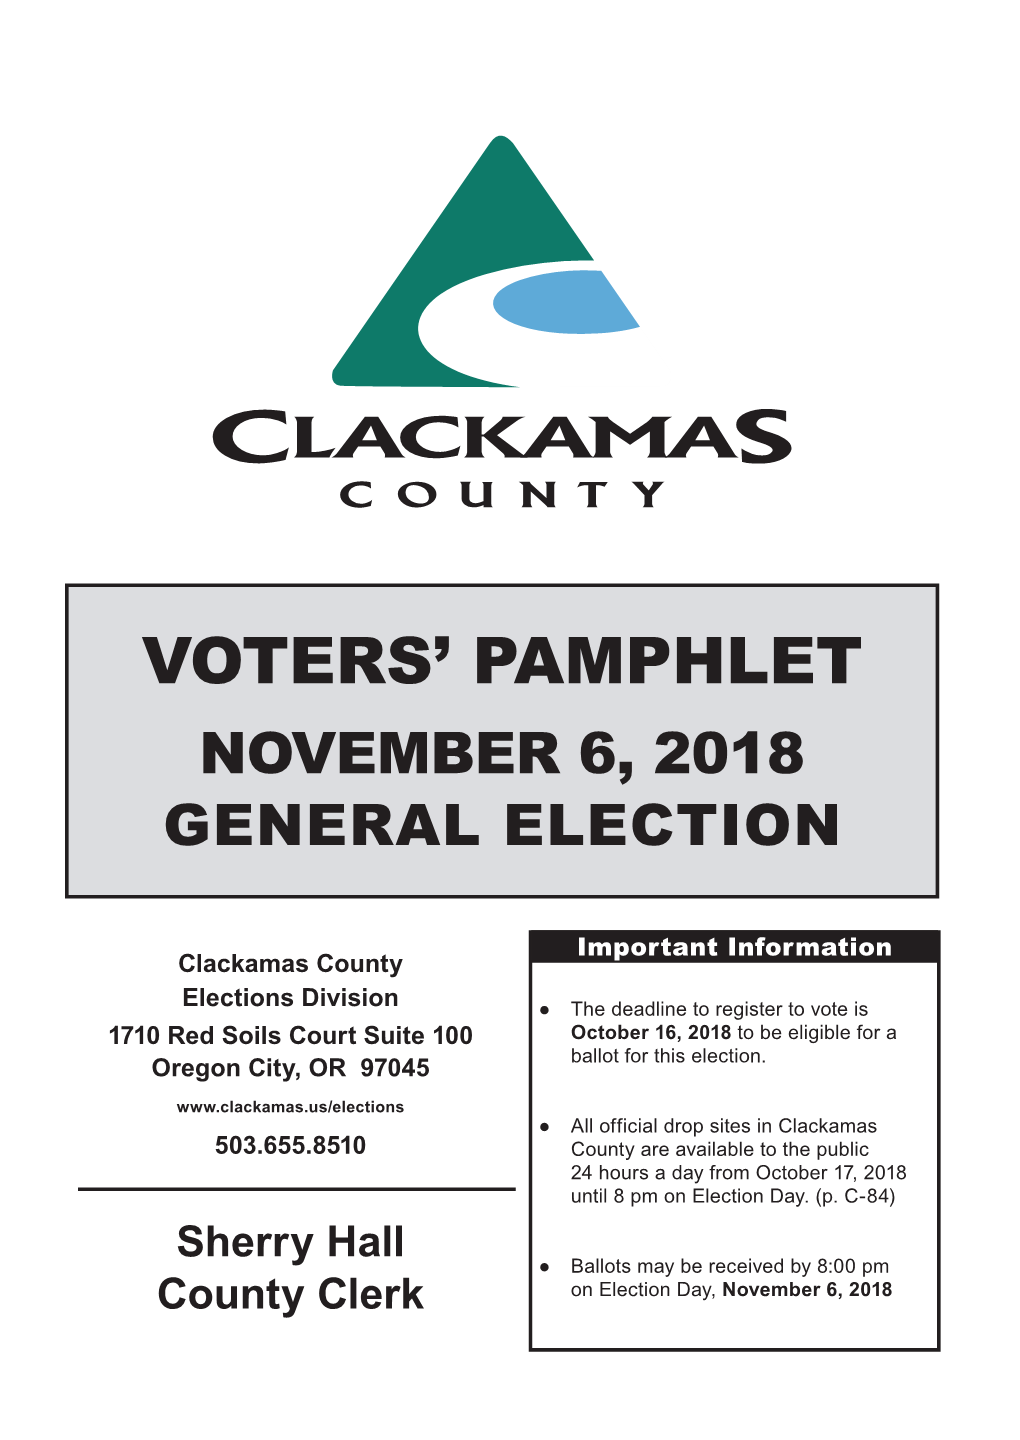 Voters' Pamphlet Has a Shaded Side Bar and Has City of Wilsonville, Councilor